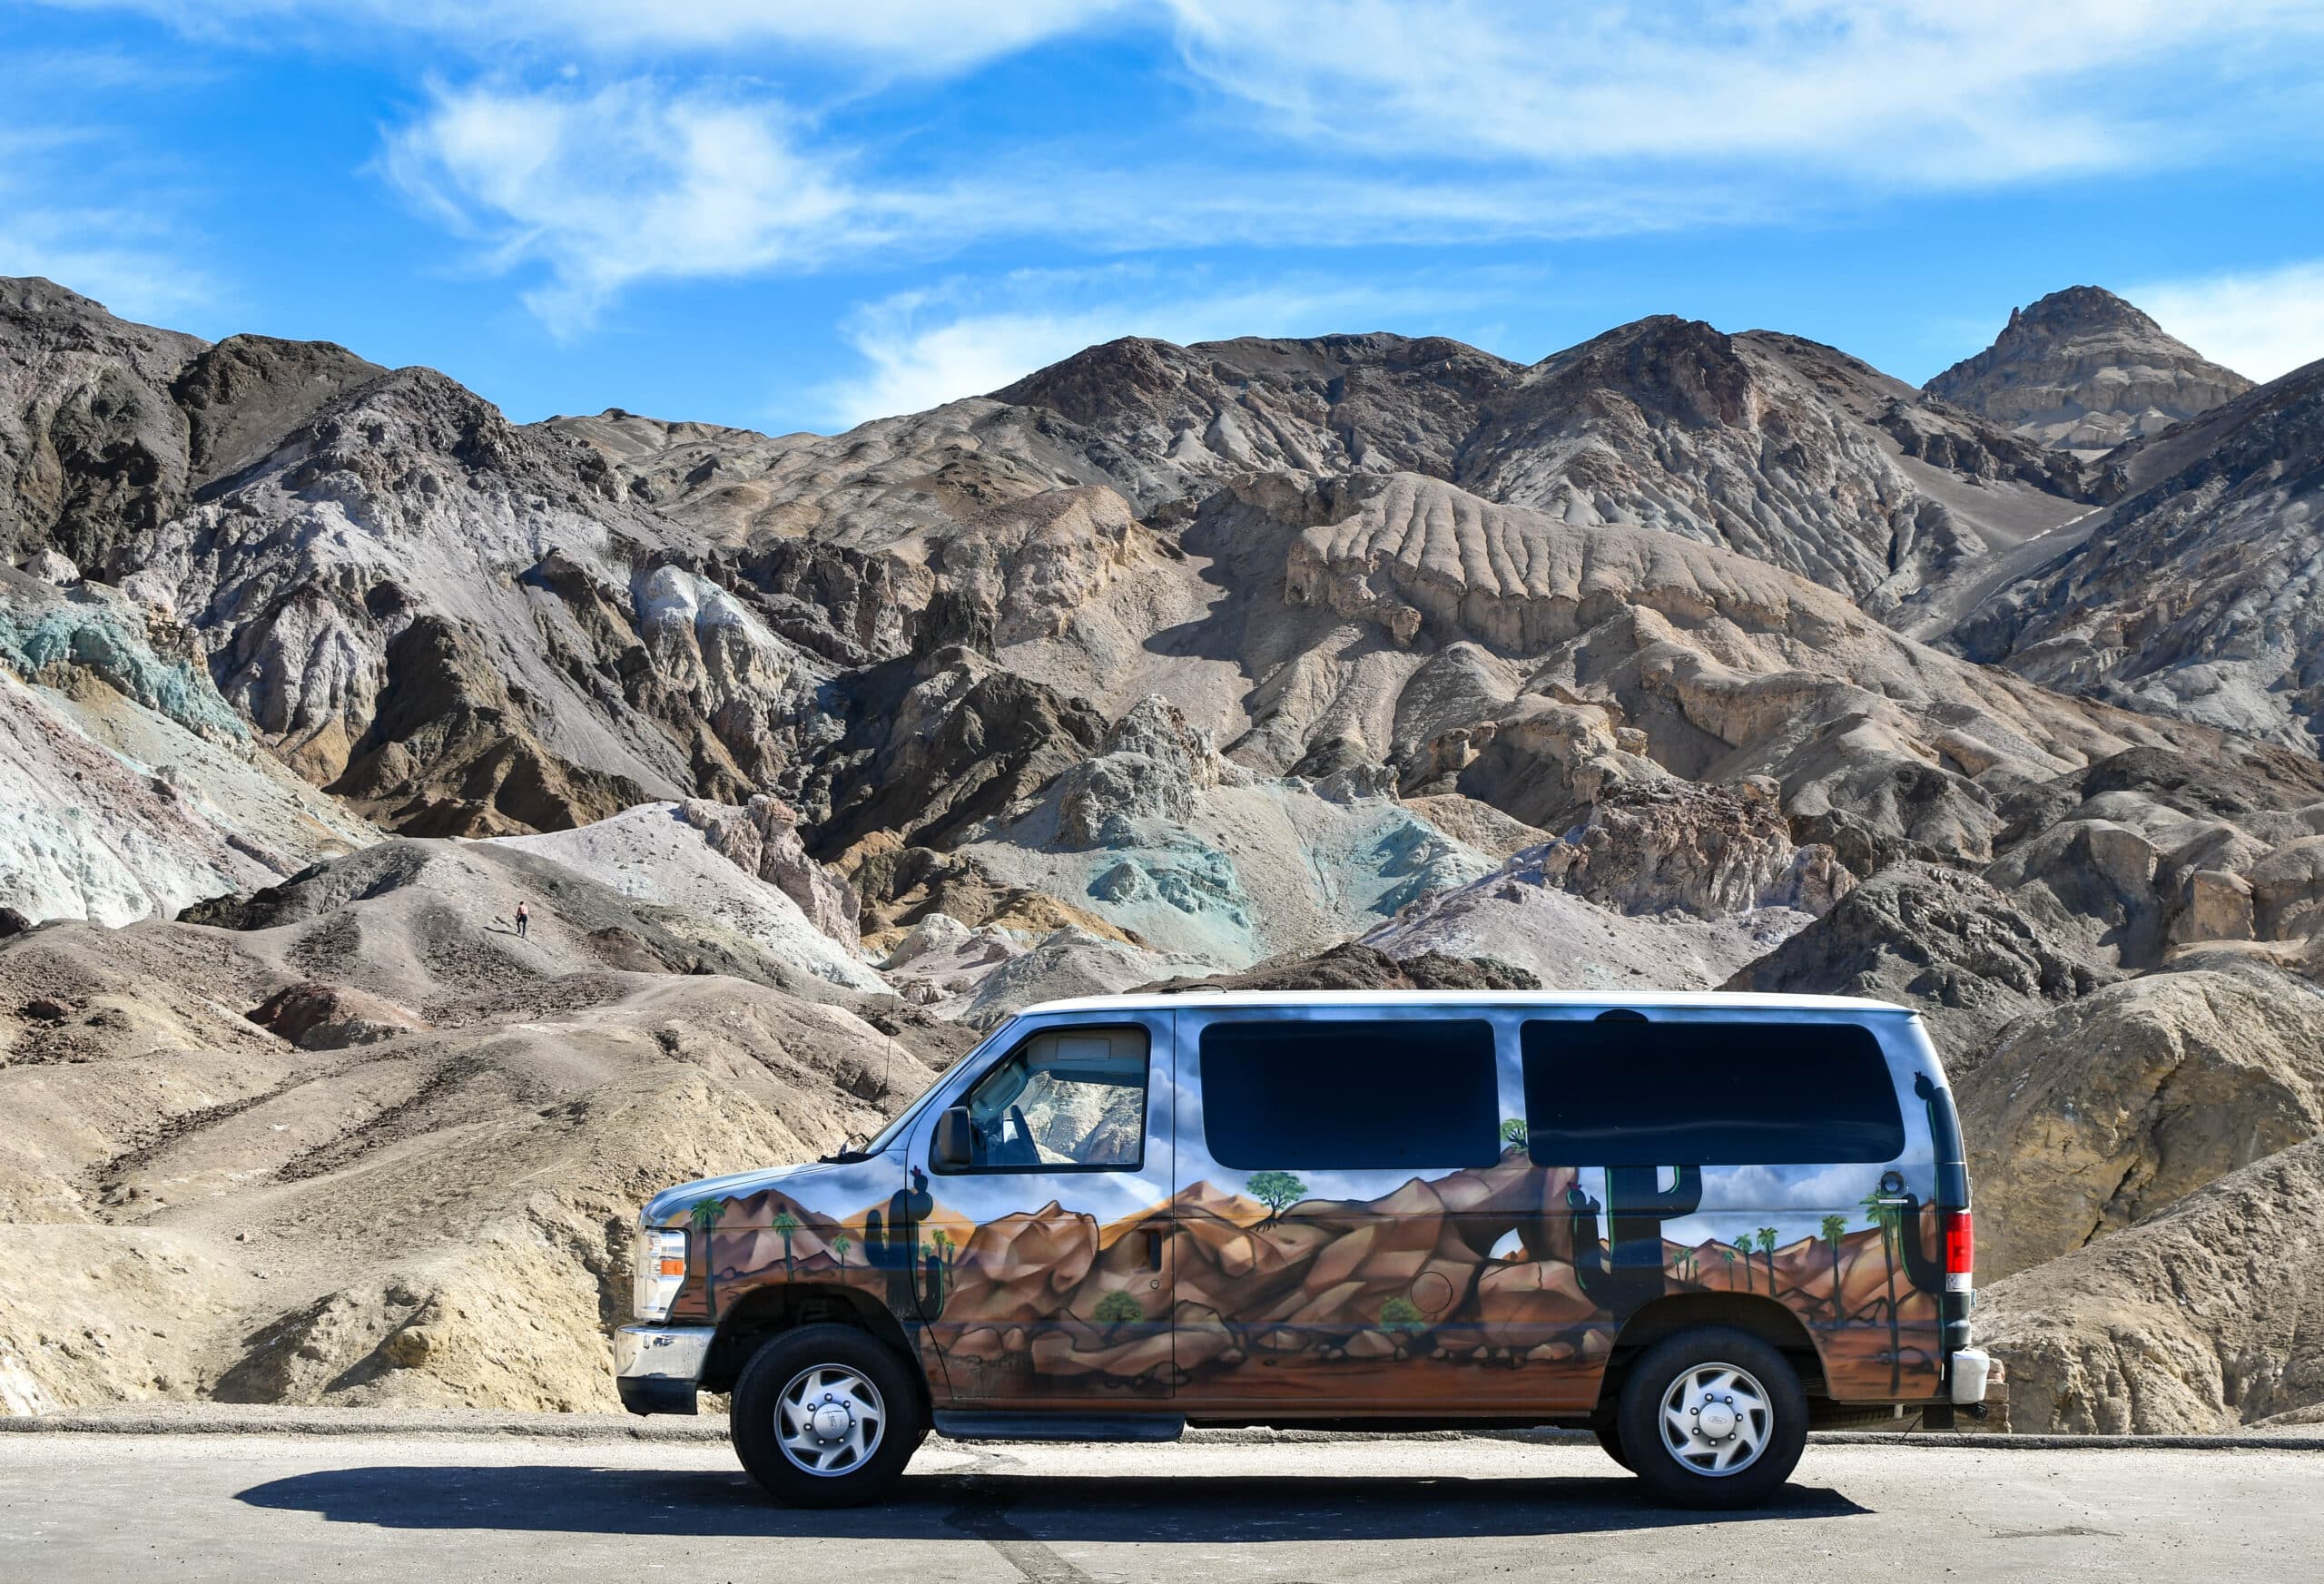 An Escape Camper Van in Death Valley National Park on a California Road trip.